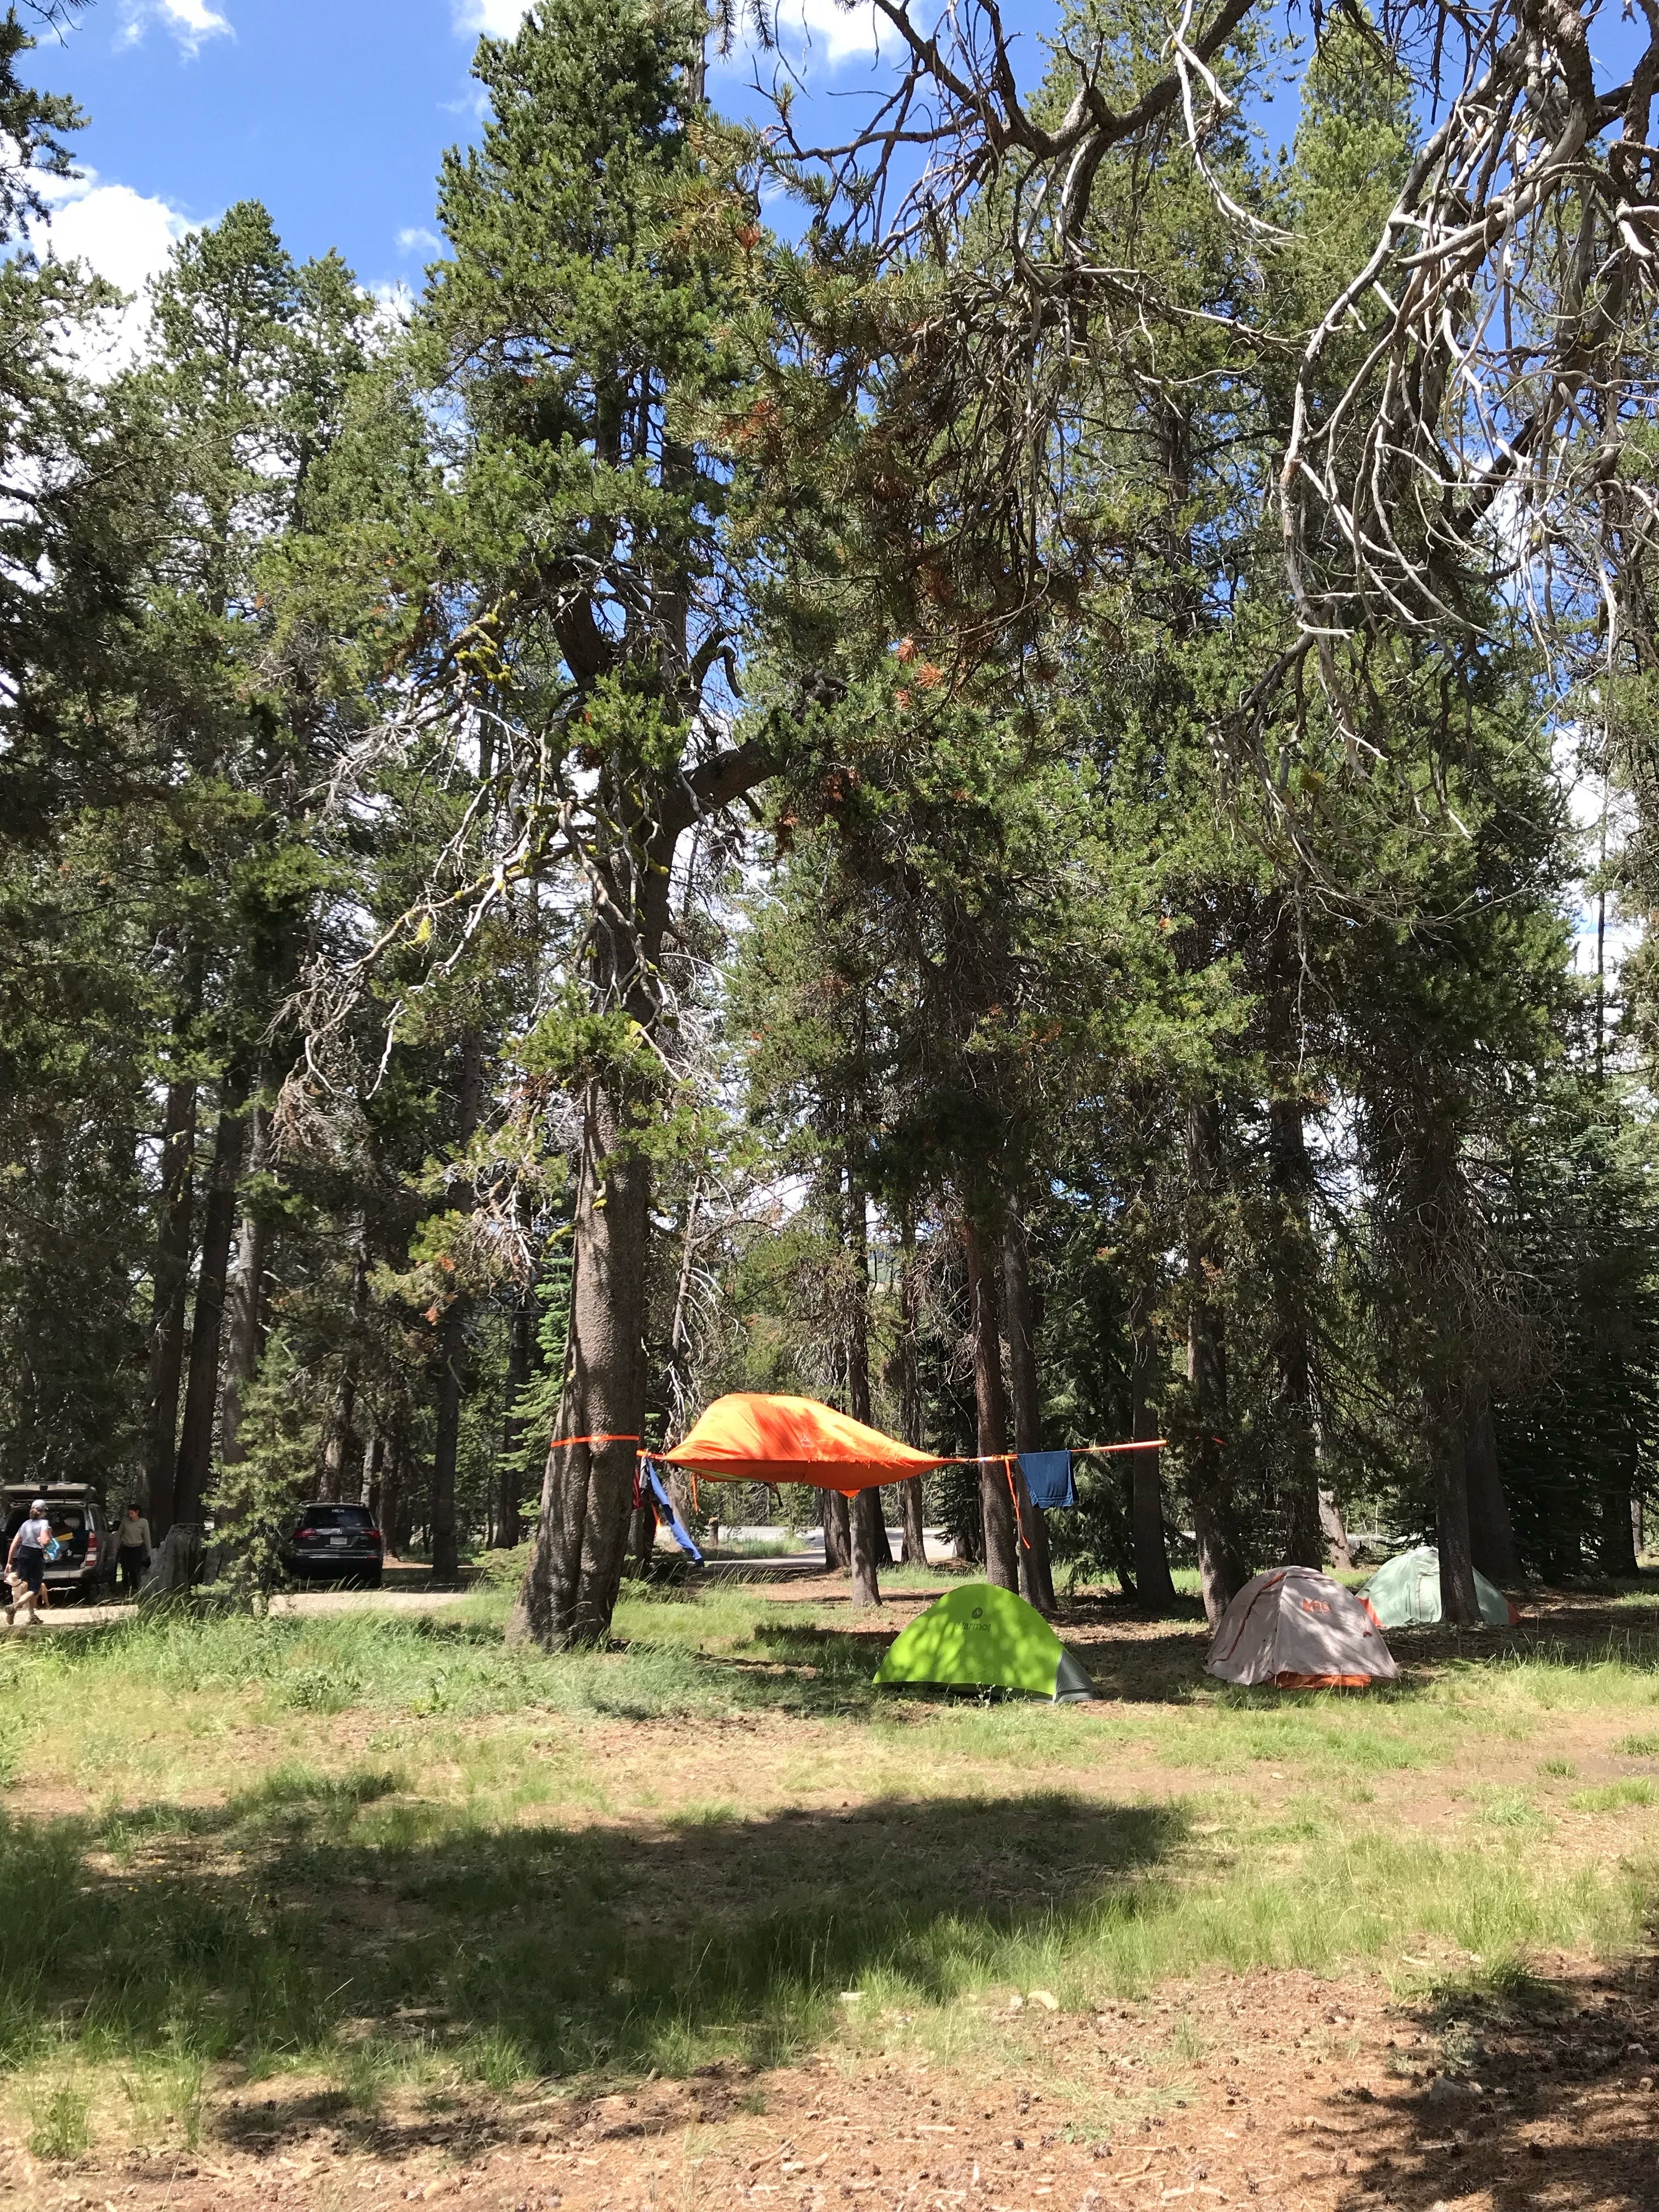 Camper submitted image from Bear Valley Dispersed Camping - 3